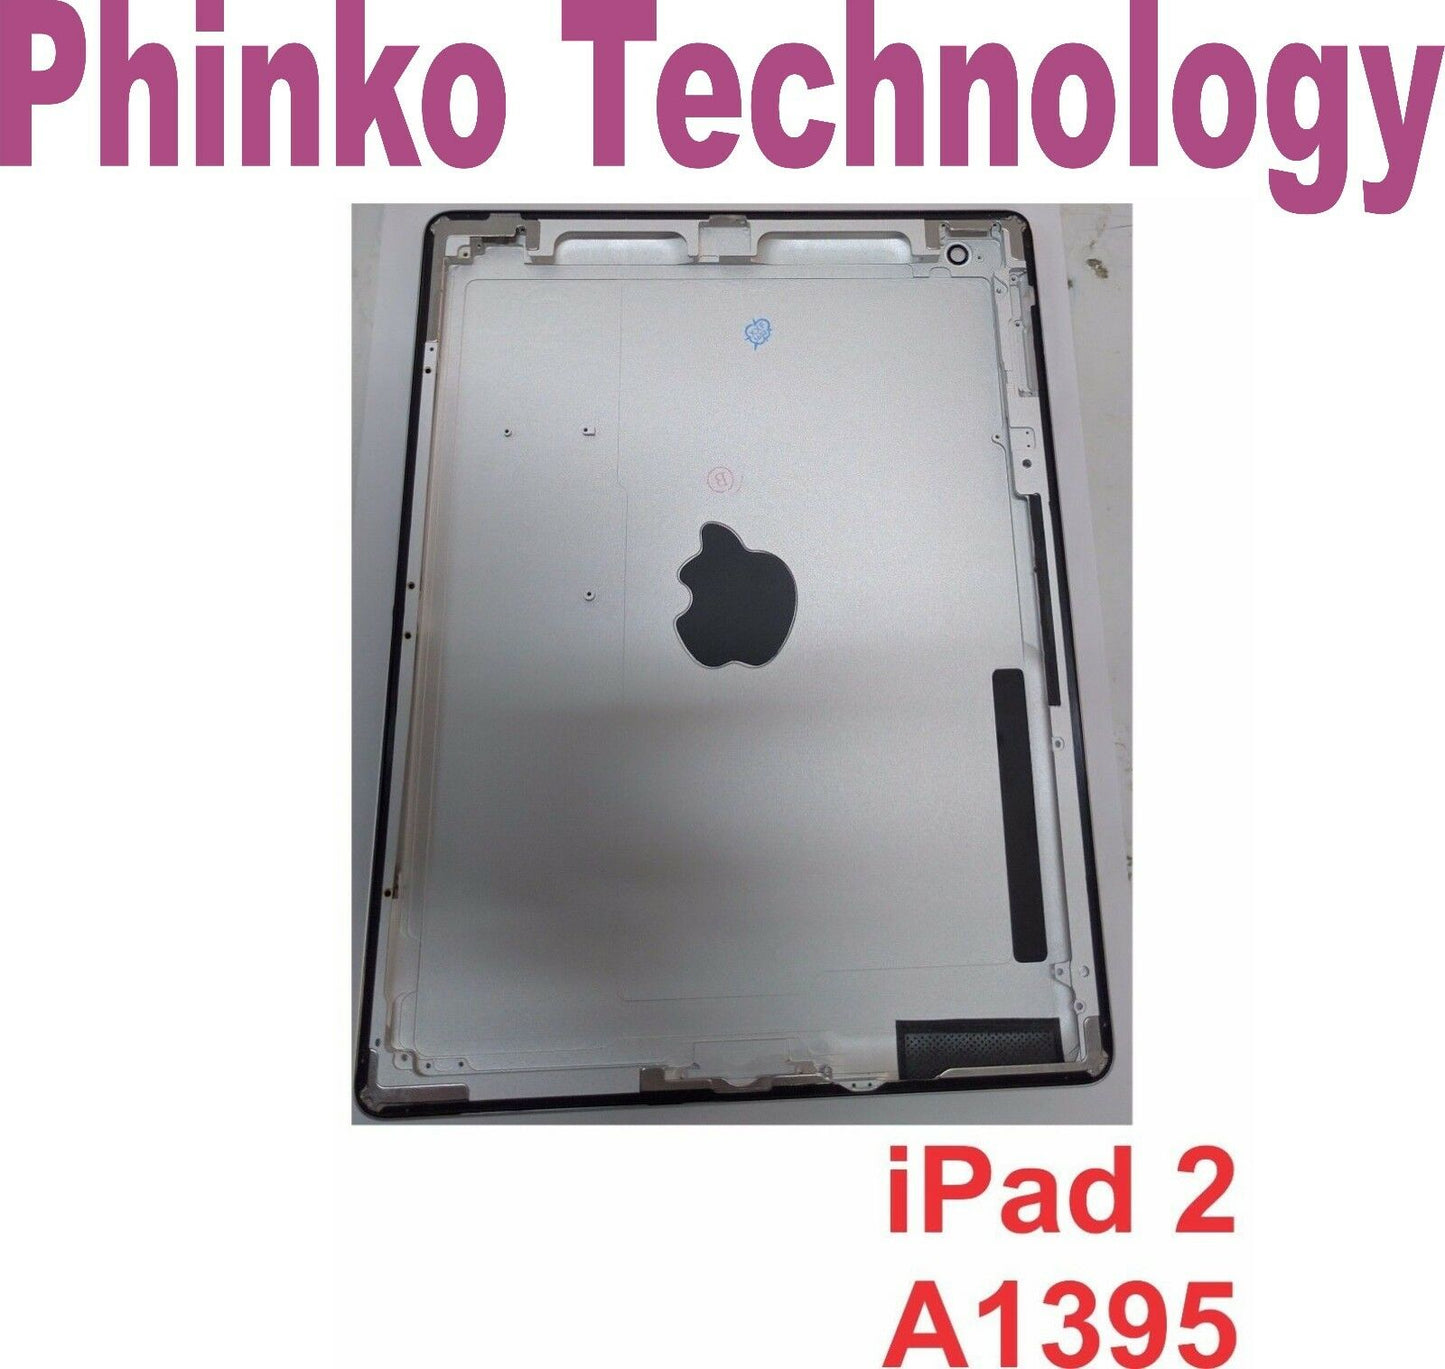 For  iPad 2 A1395 Back Cover Housing WIFI Version Aluminum alloy --- NO 3G